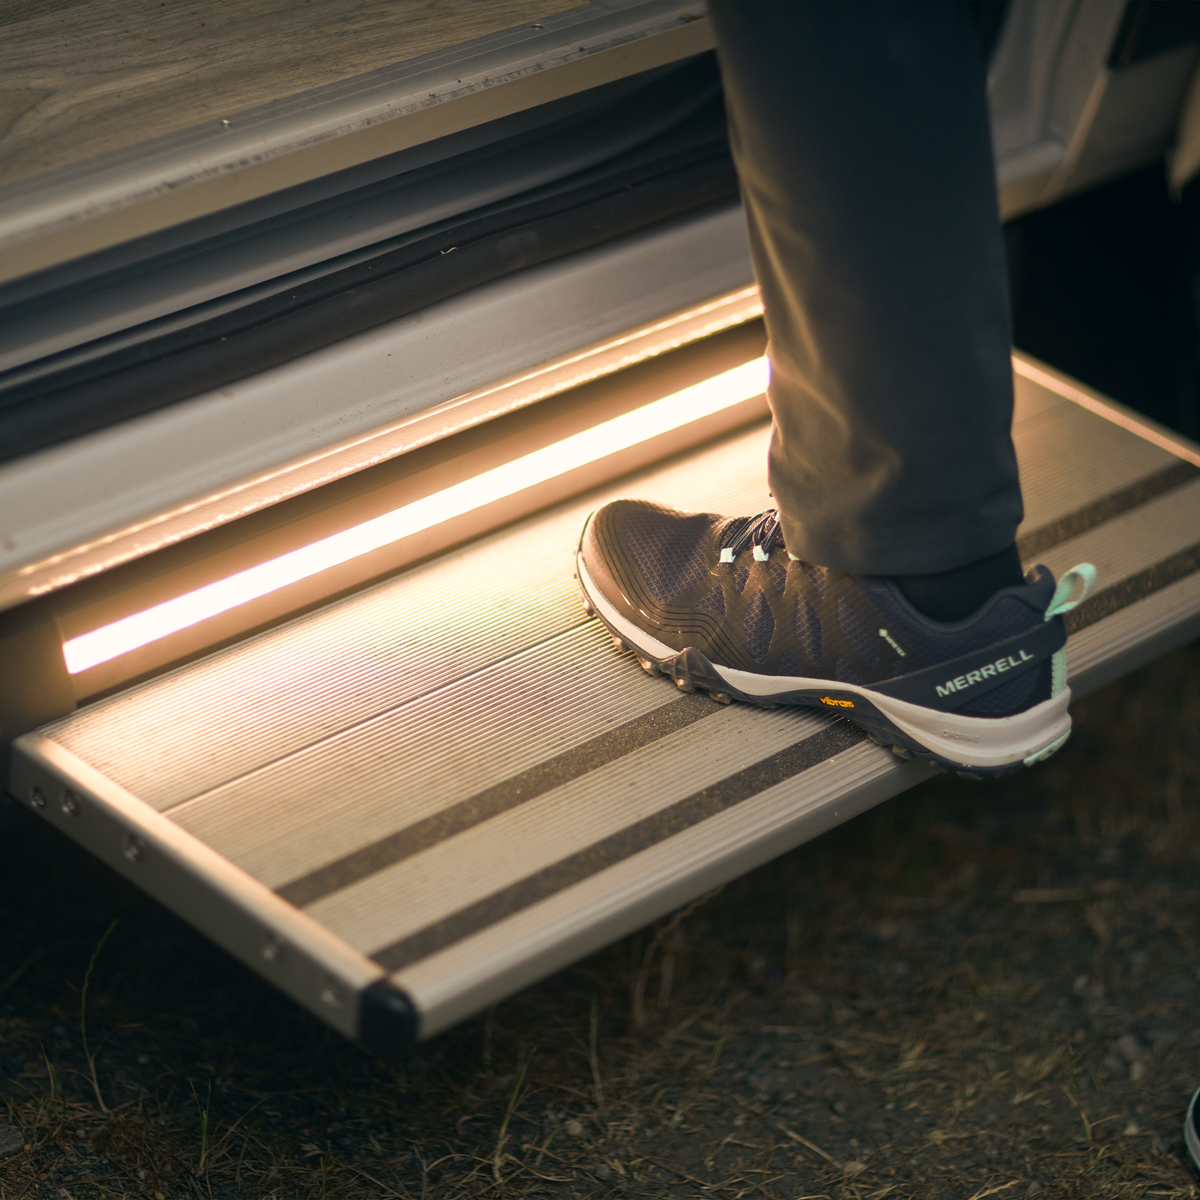 A close-up of someone stepping on a Thule Slide-Out Step Standard caravan step.